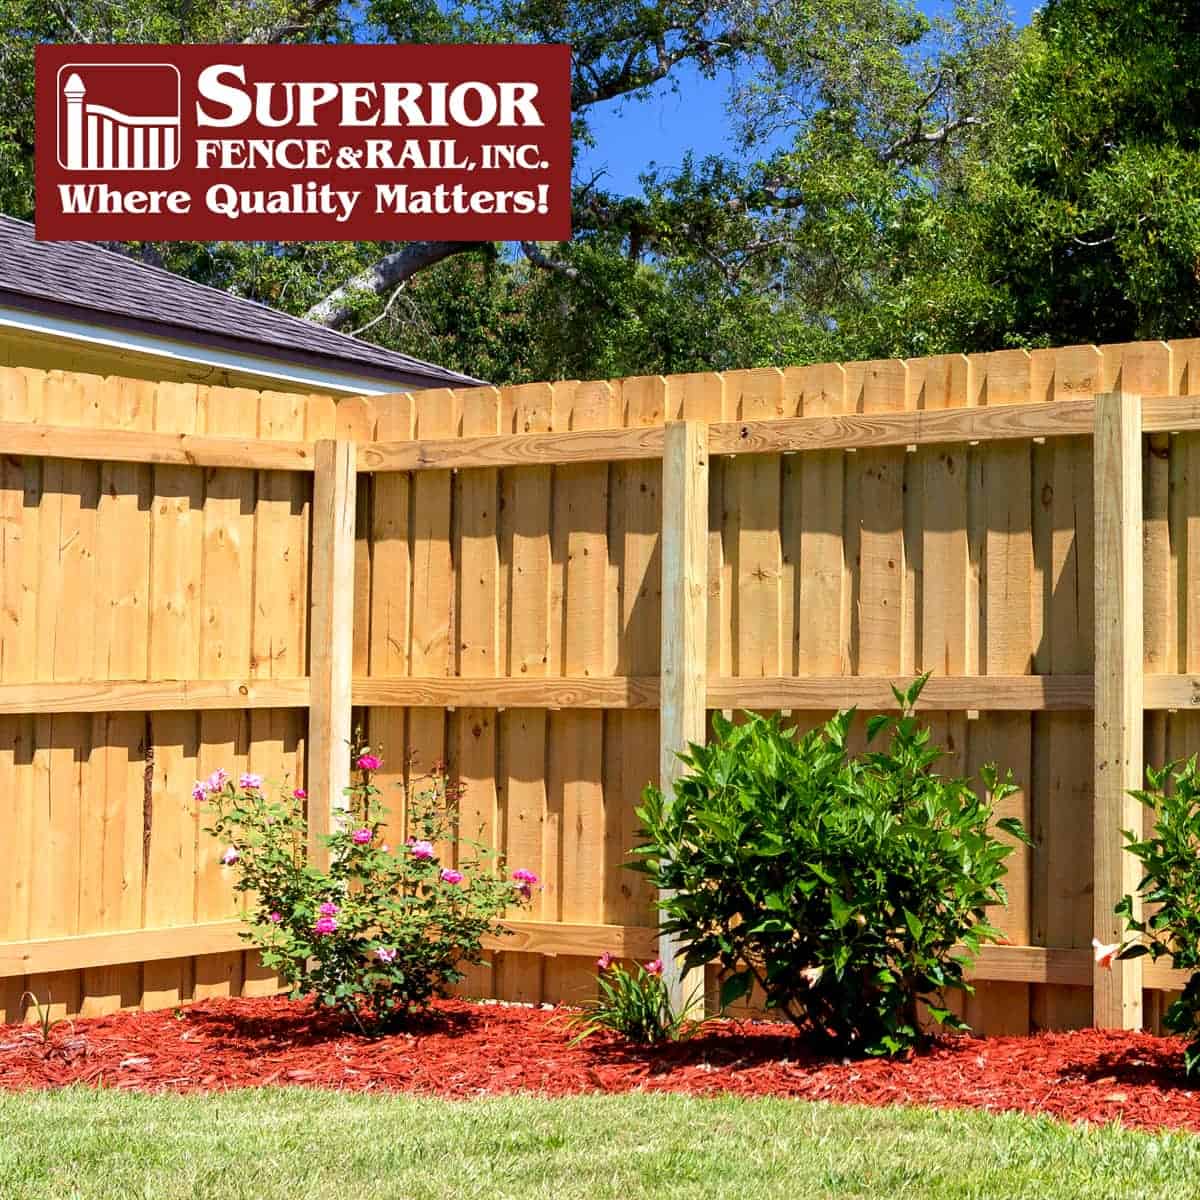 Dundee fence company contractor